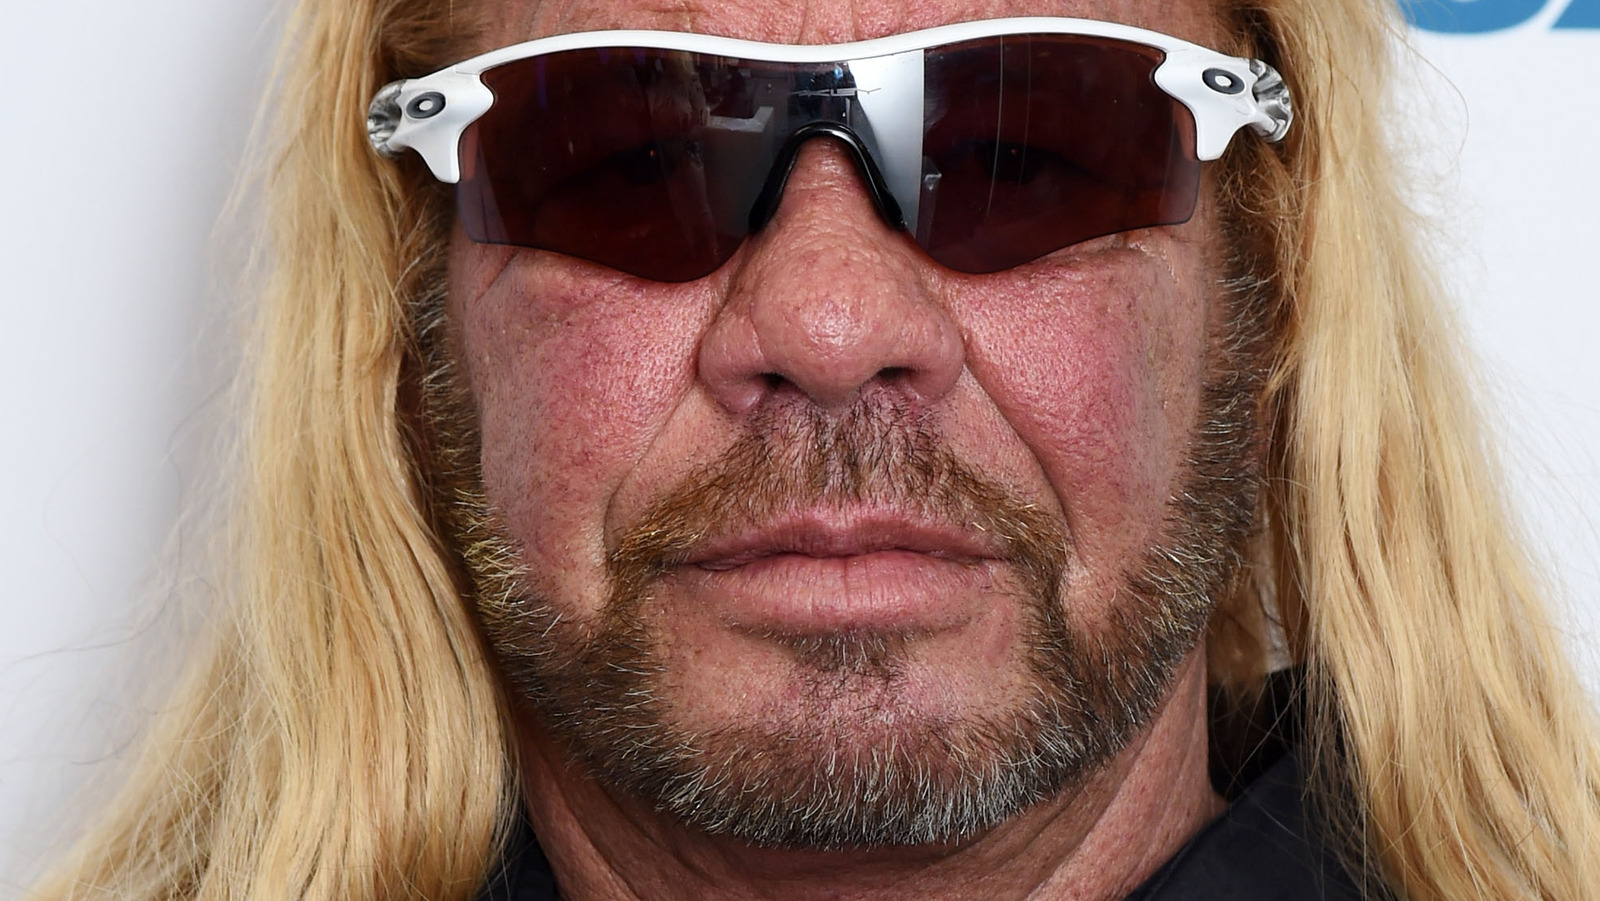 Does Dog The Bounty Hunter Really Have A Lead On Brian Laundrie?